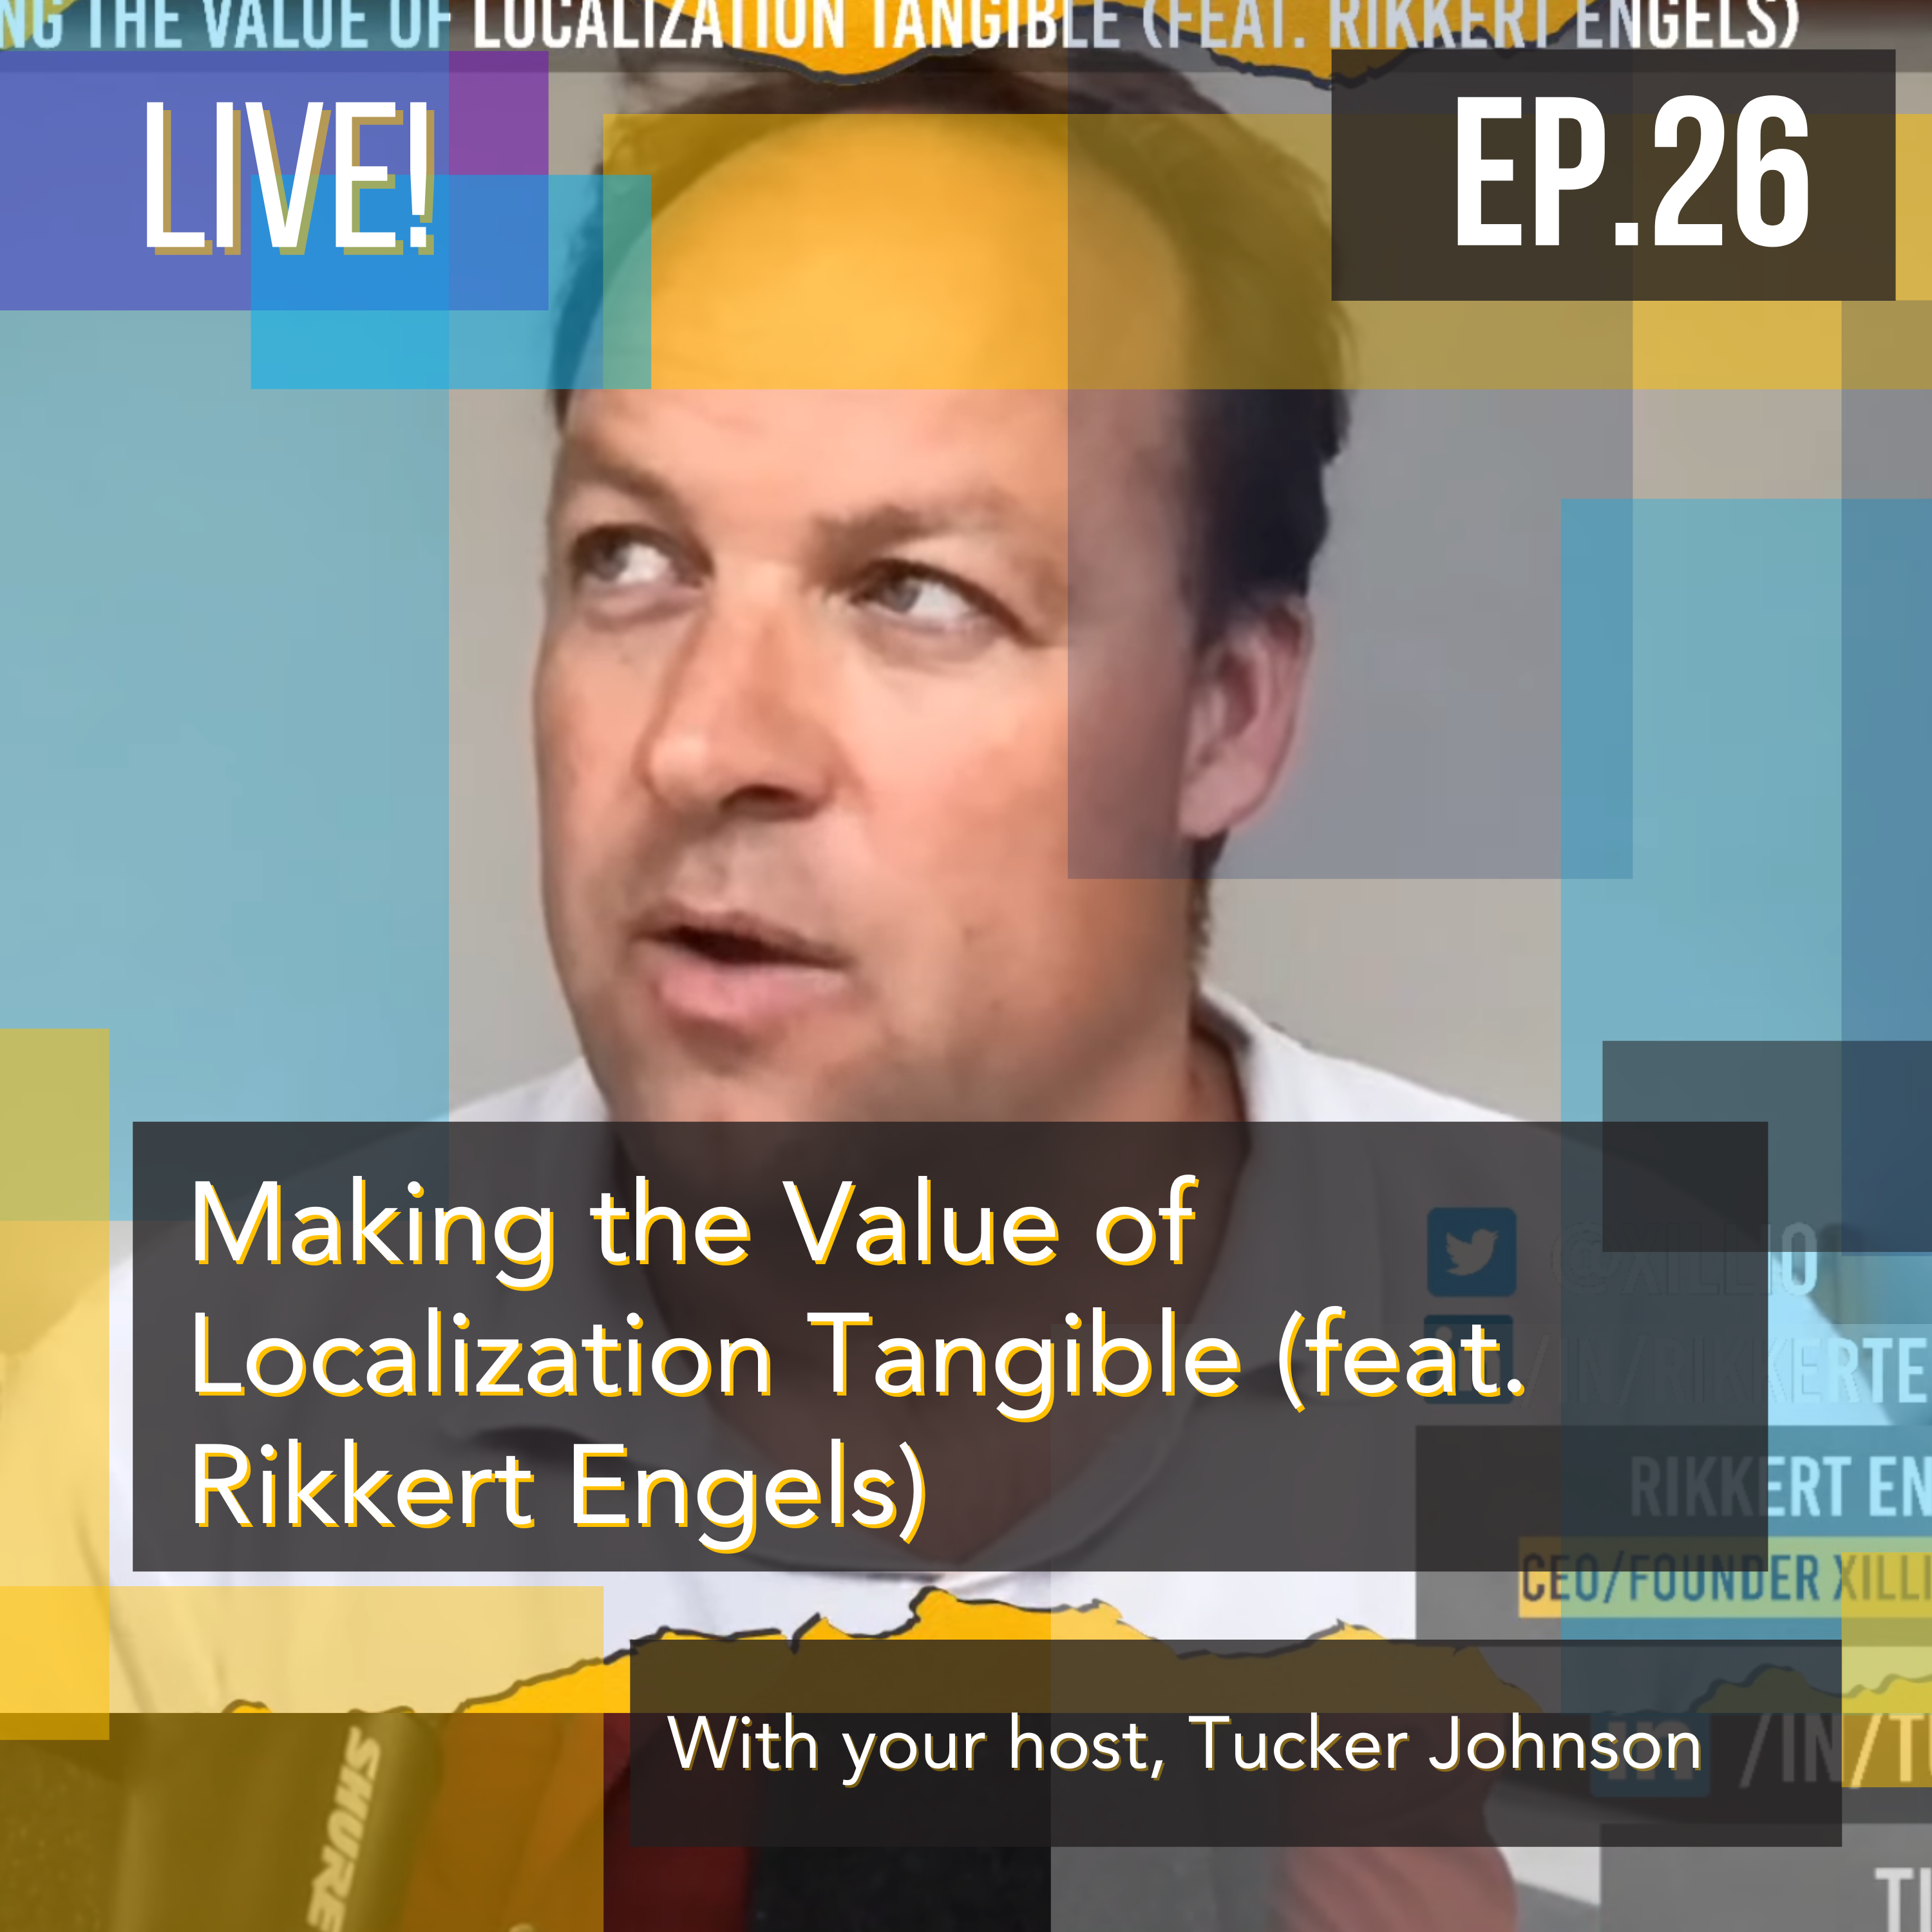 Making the Value of Localization Tangible (feat. Rikkert Engels)